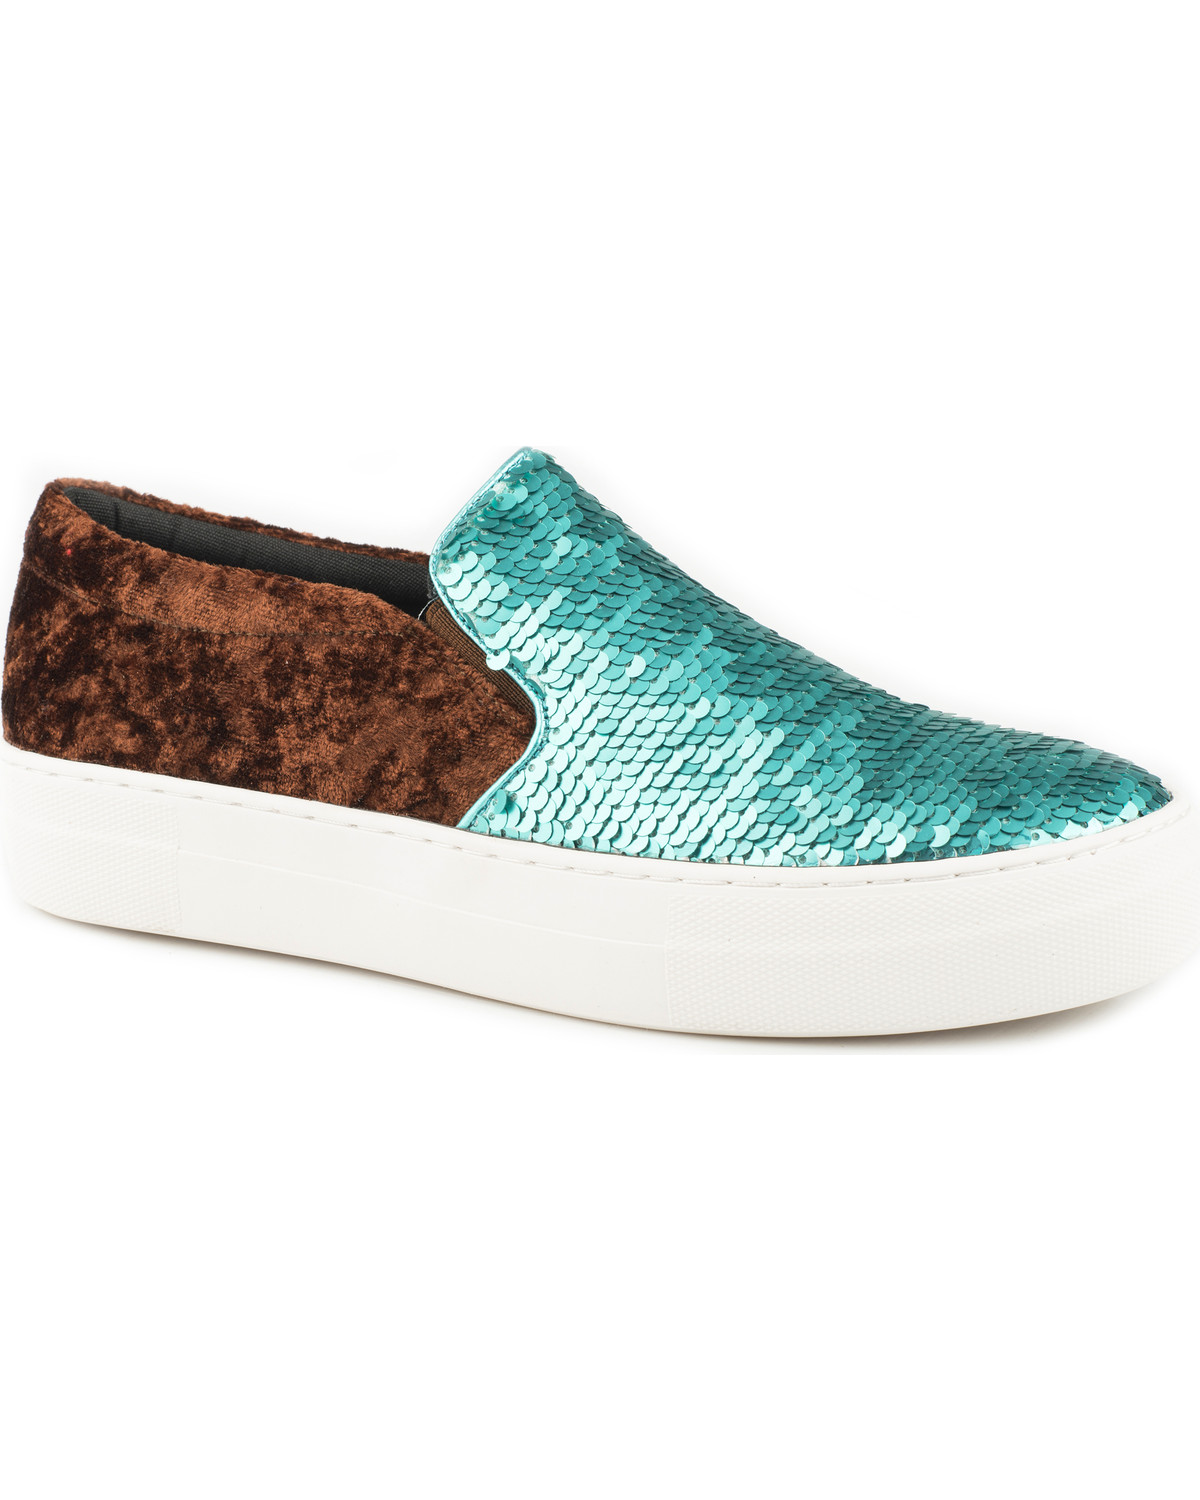 womens sparkly slip on shoes